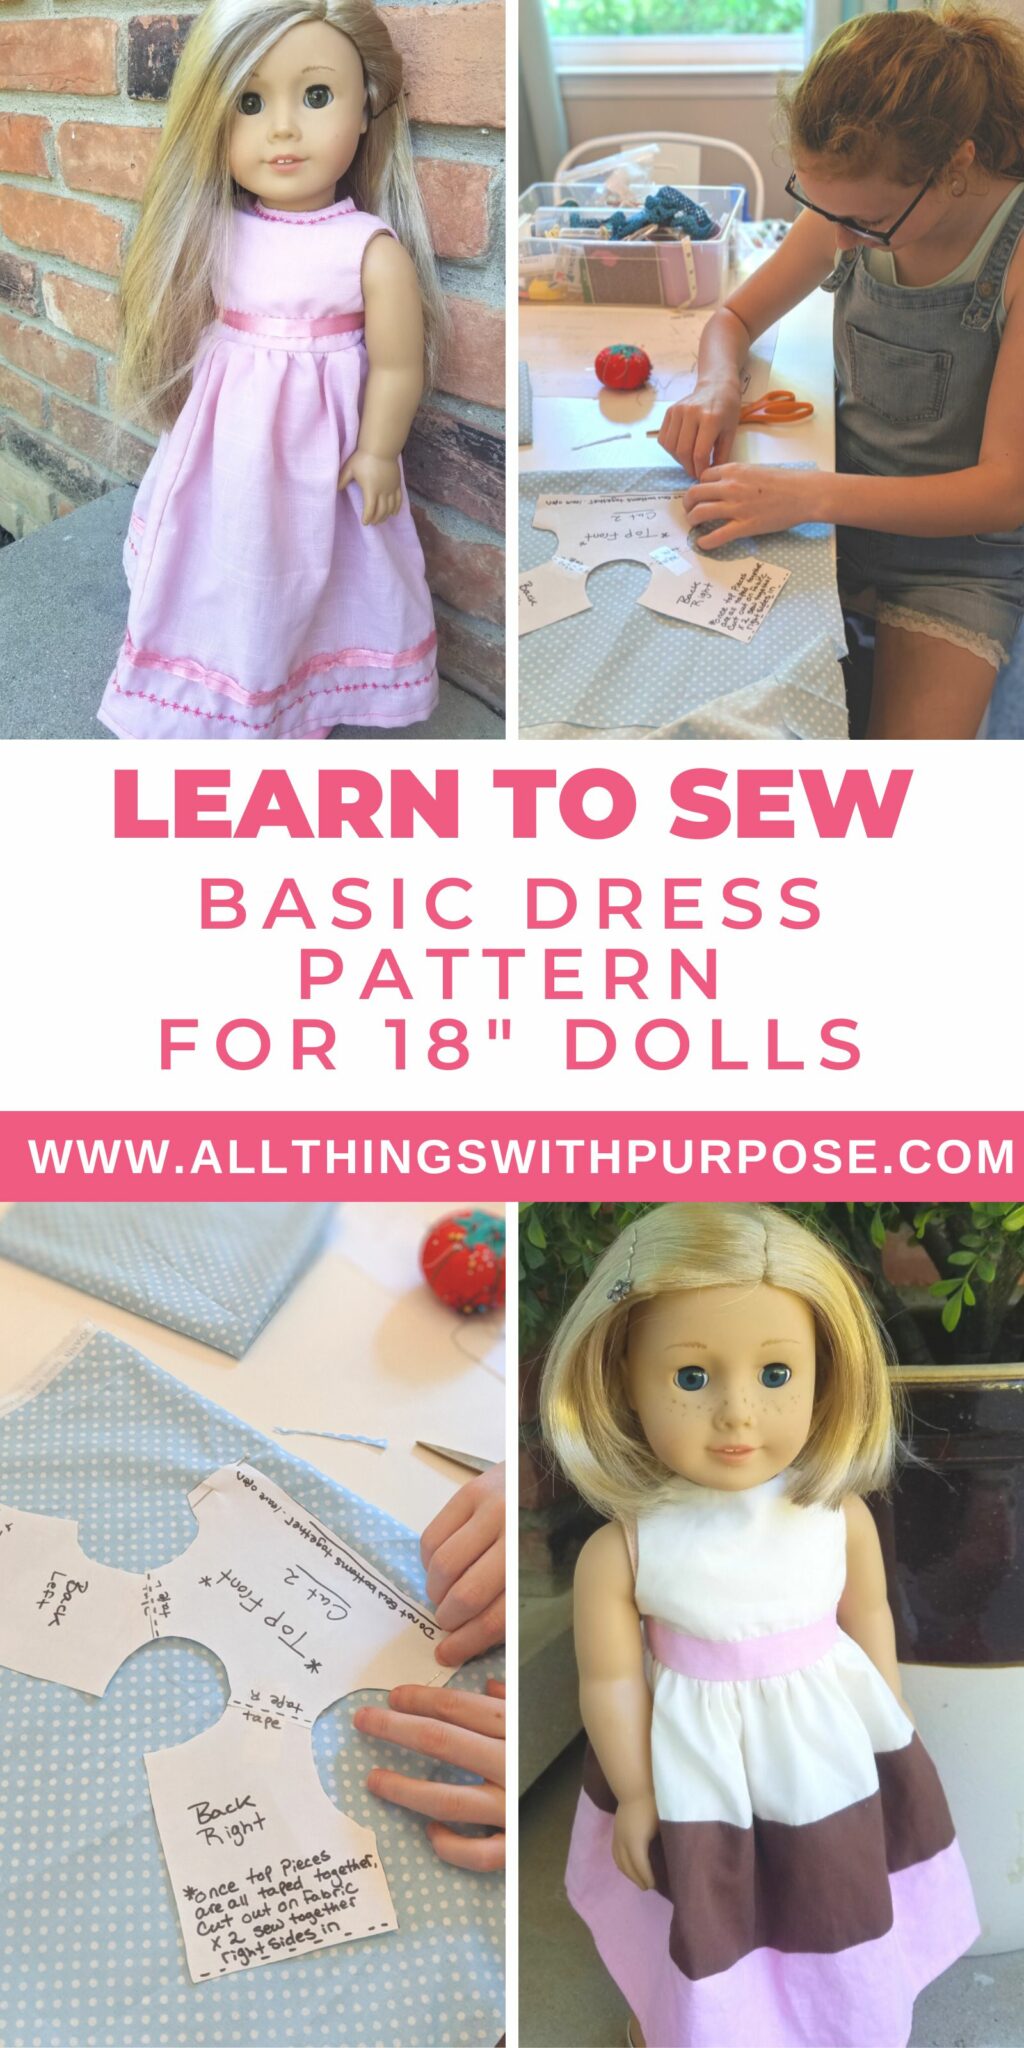 9 Barbie ideas  clothing patterns free, barbie sewing patterns